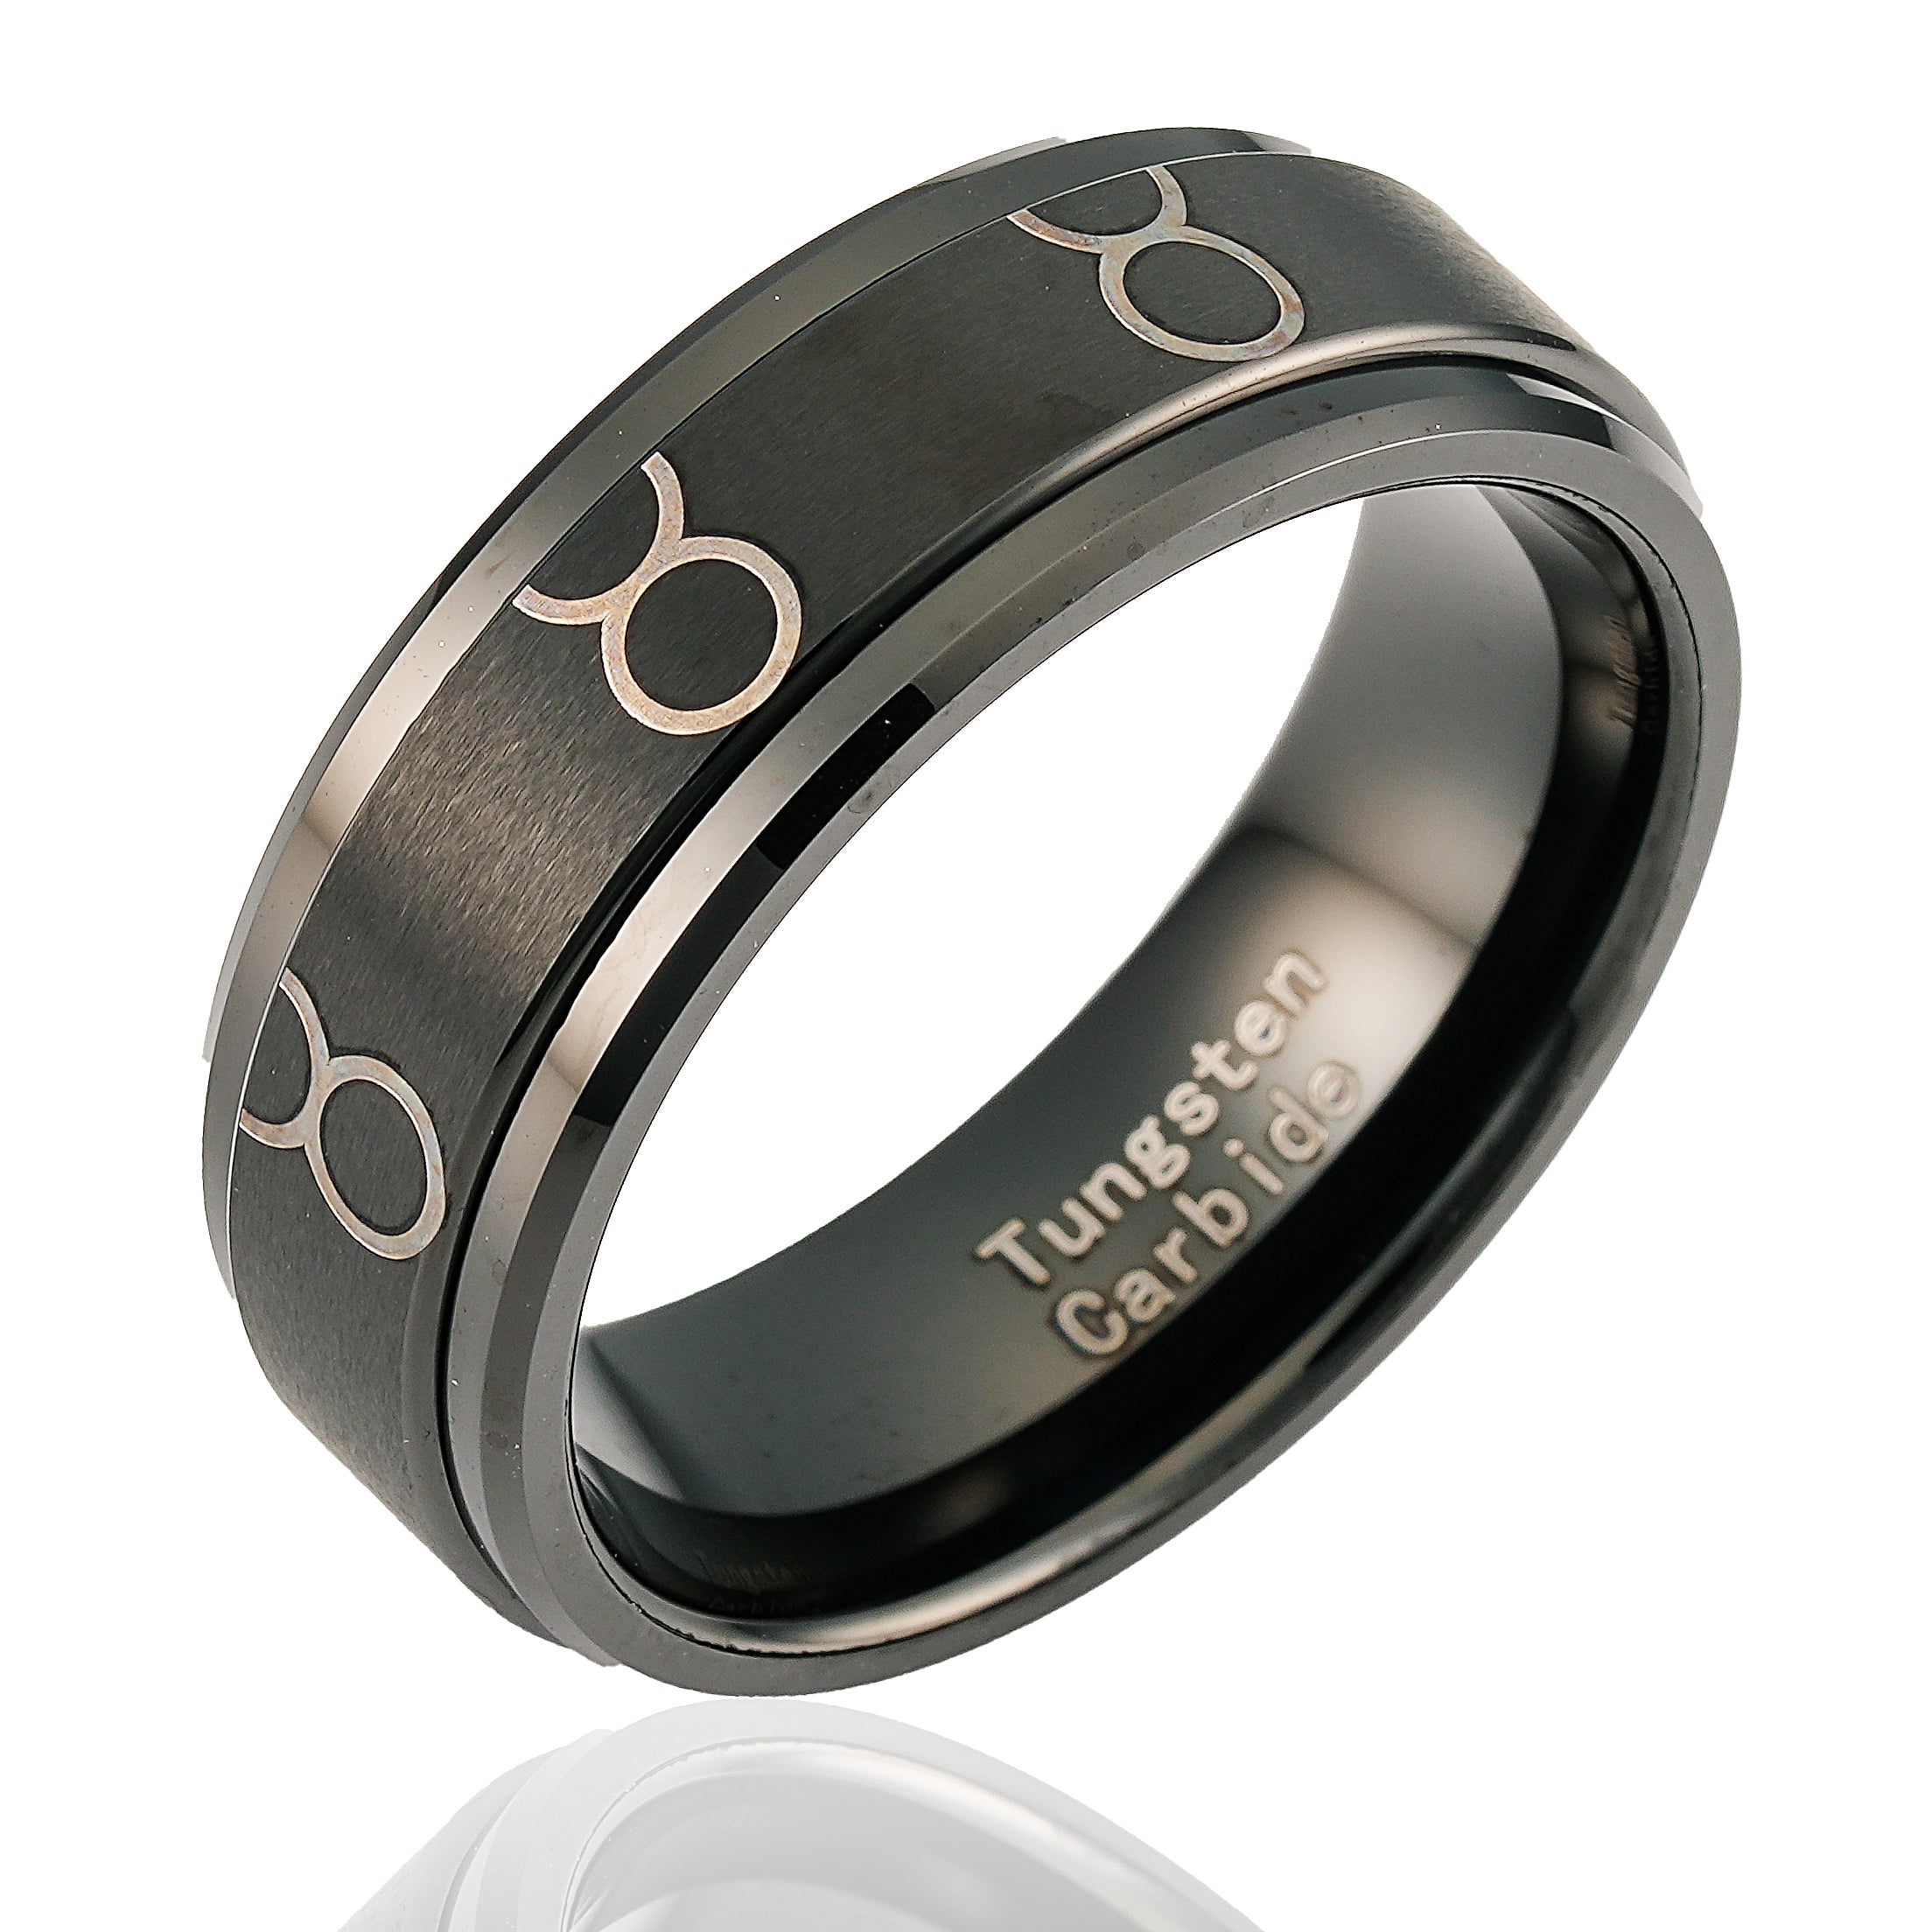 Buy COLOUR OUR DREAMS Rings for Women Black Ring Stainless Steel Black Band Ring  Women and Girls at Amazon.in